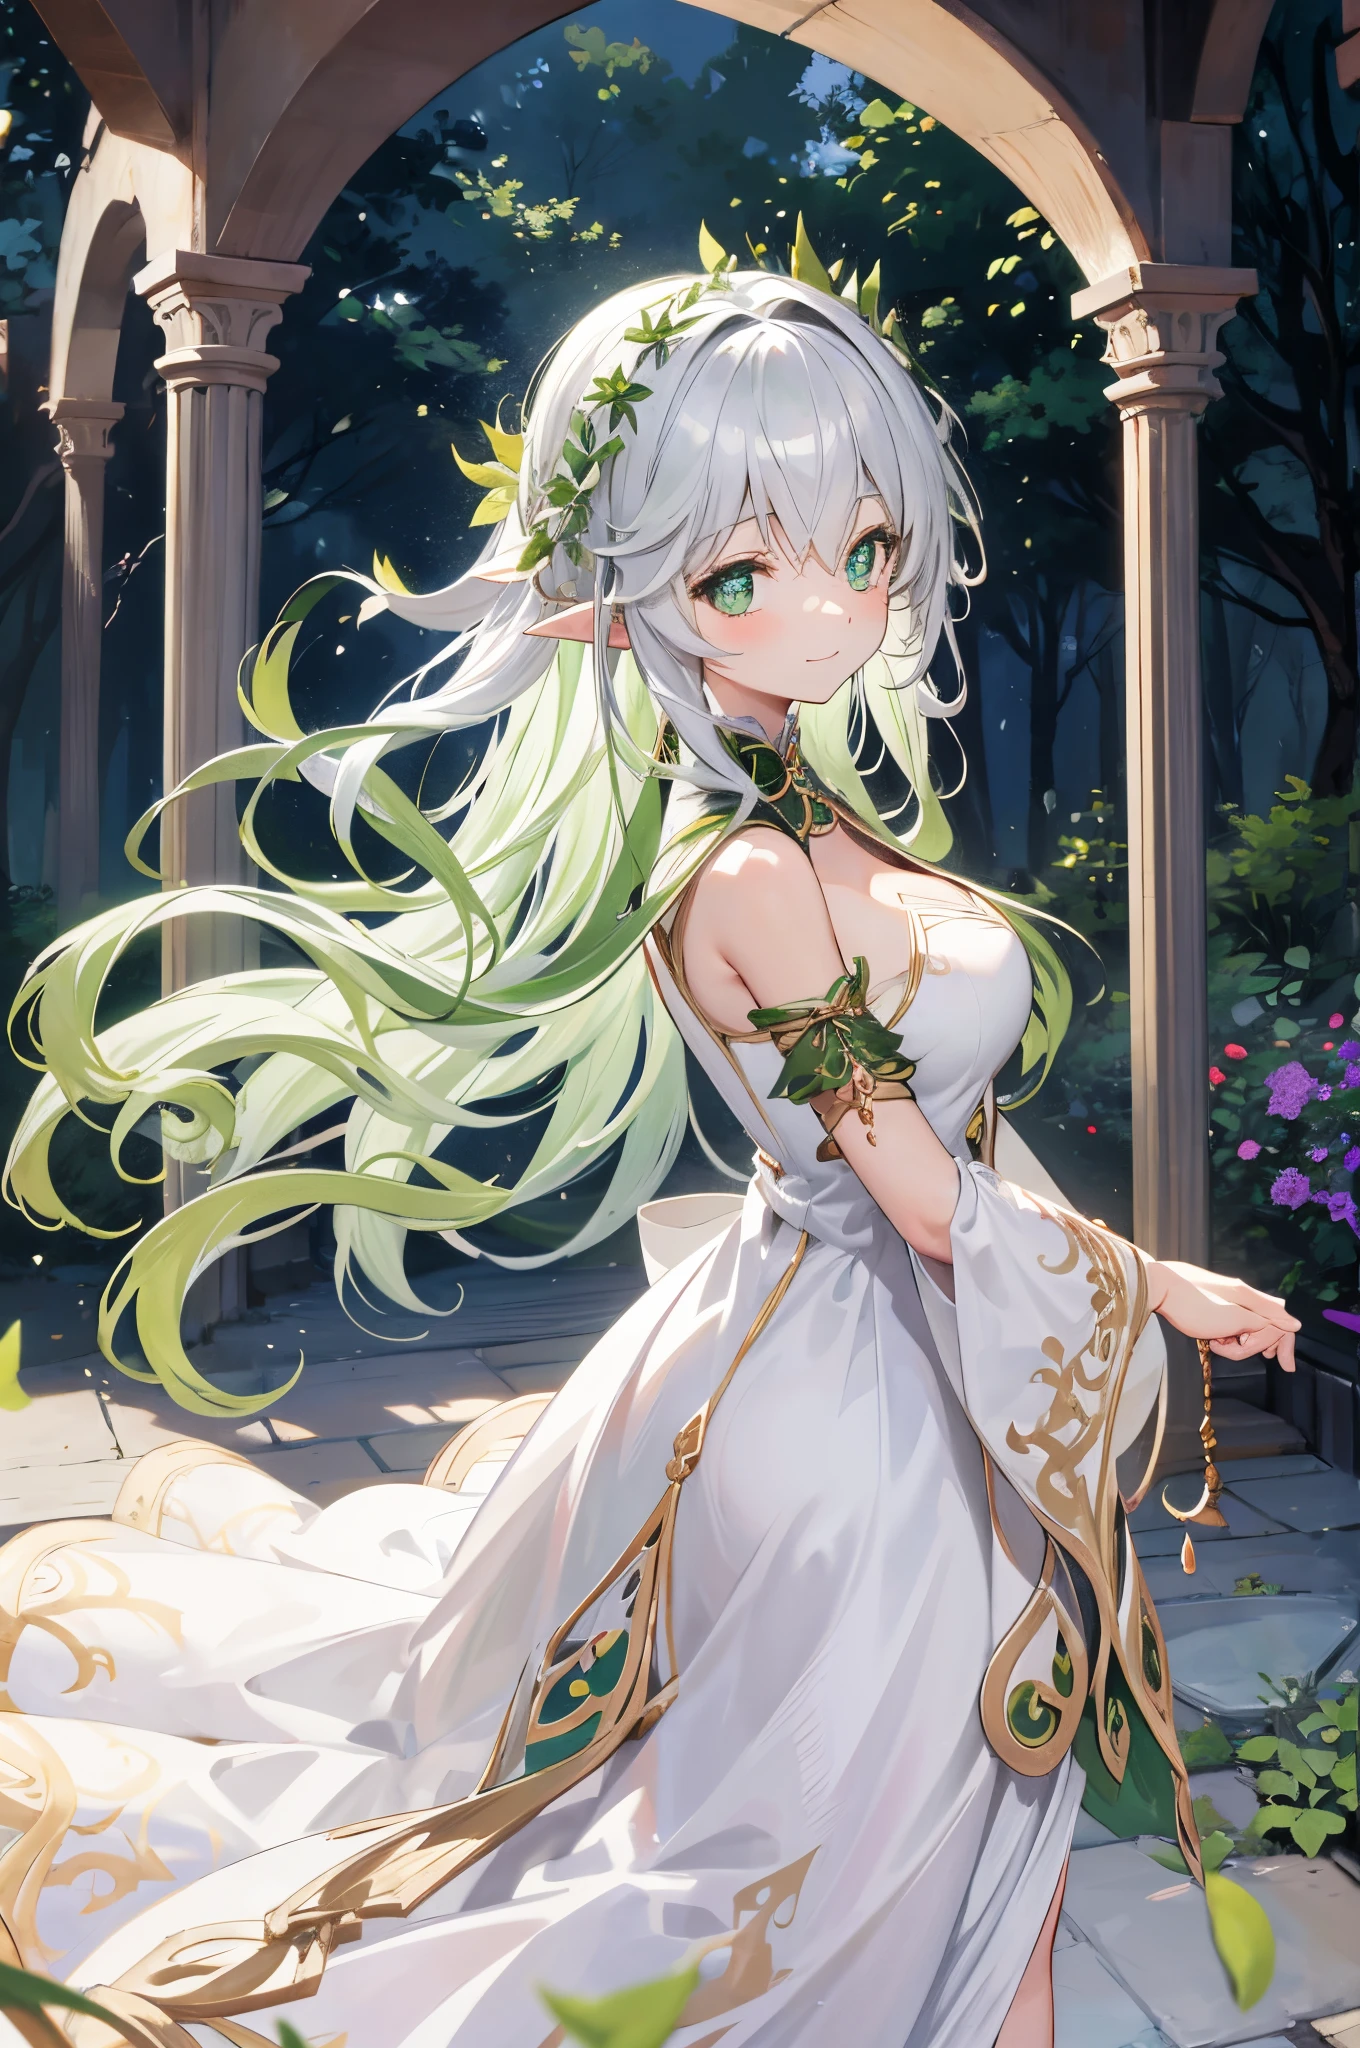 elvish、Looking at the camera、A smile、green fluffy long hair、Hair in the wind、Colossal 、cleavage、White Princess Dresses、Curtsey、in woods、lots of overgrown plants、